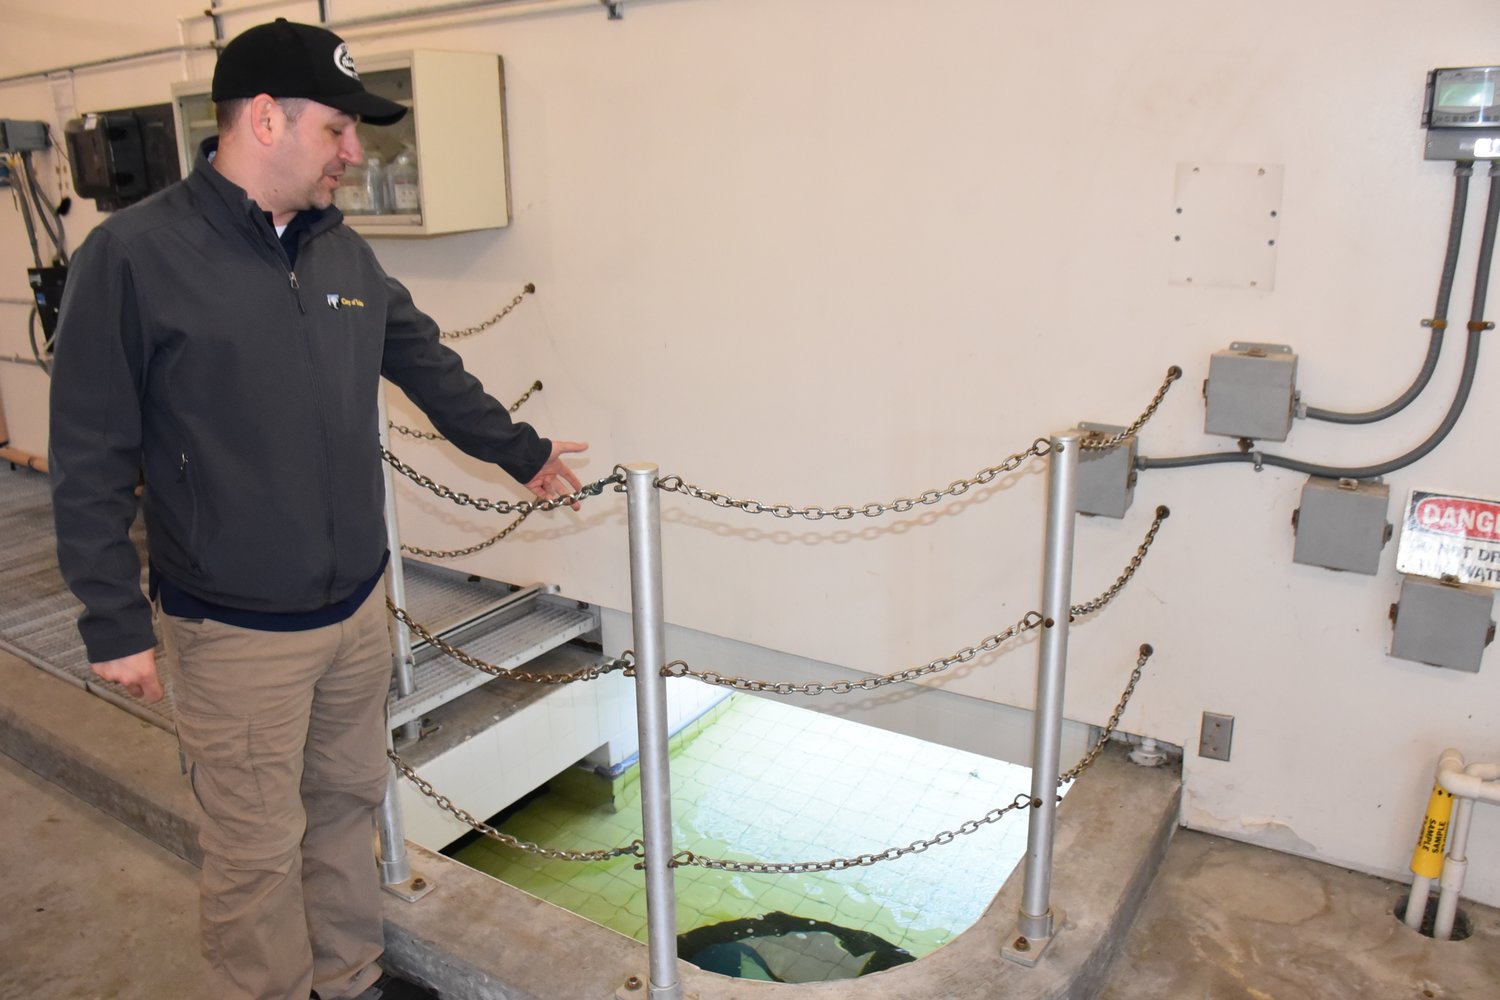 Cody Colt, Yelm Public Works director, describes how the reclaimed water is cleaned through a chlorinating process currently, and how UV light will disinfect the water in the future.